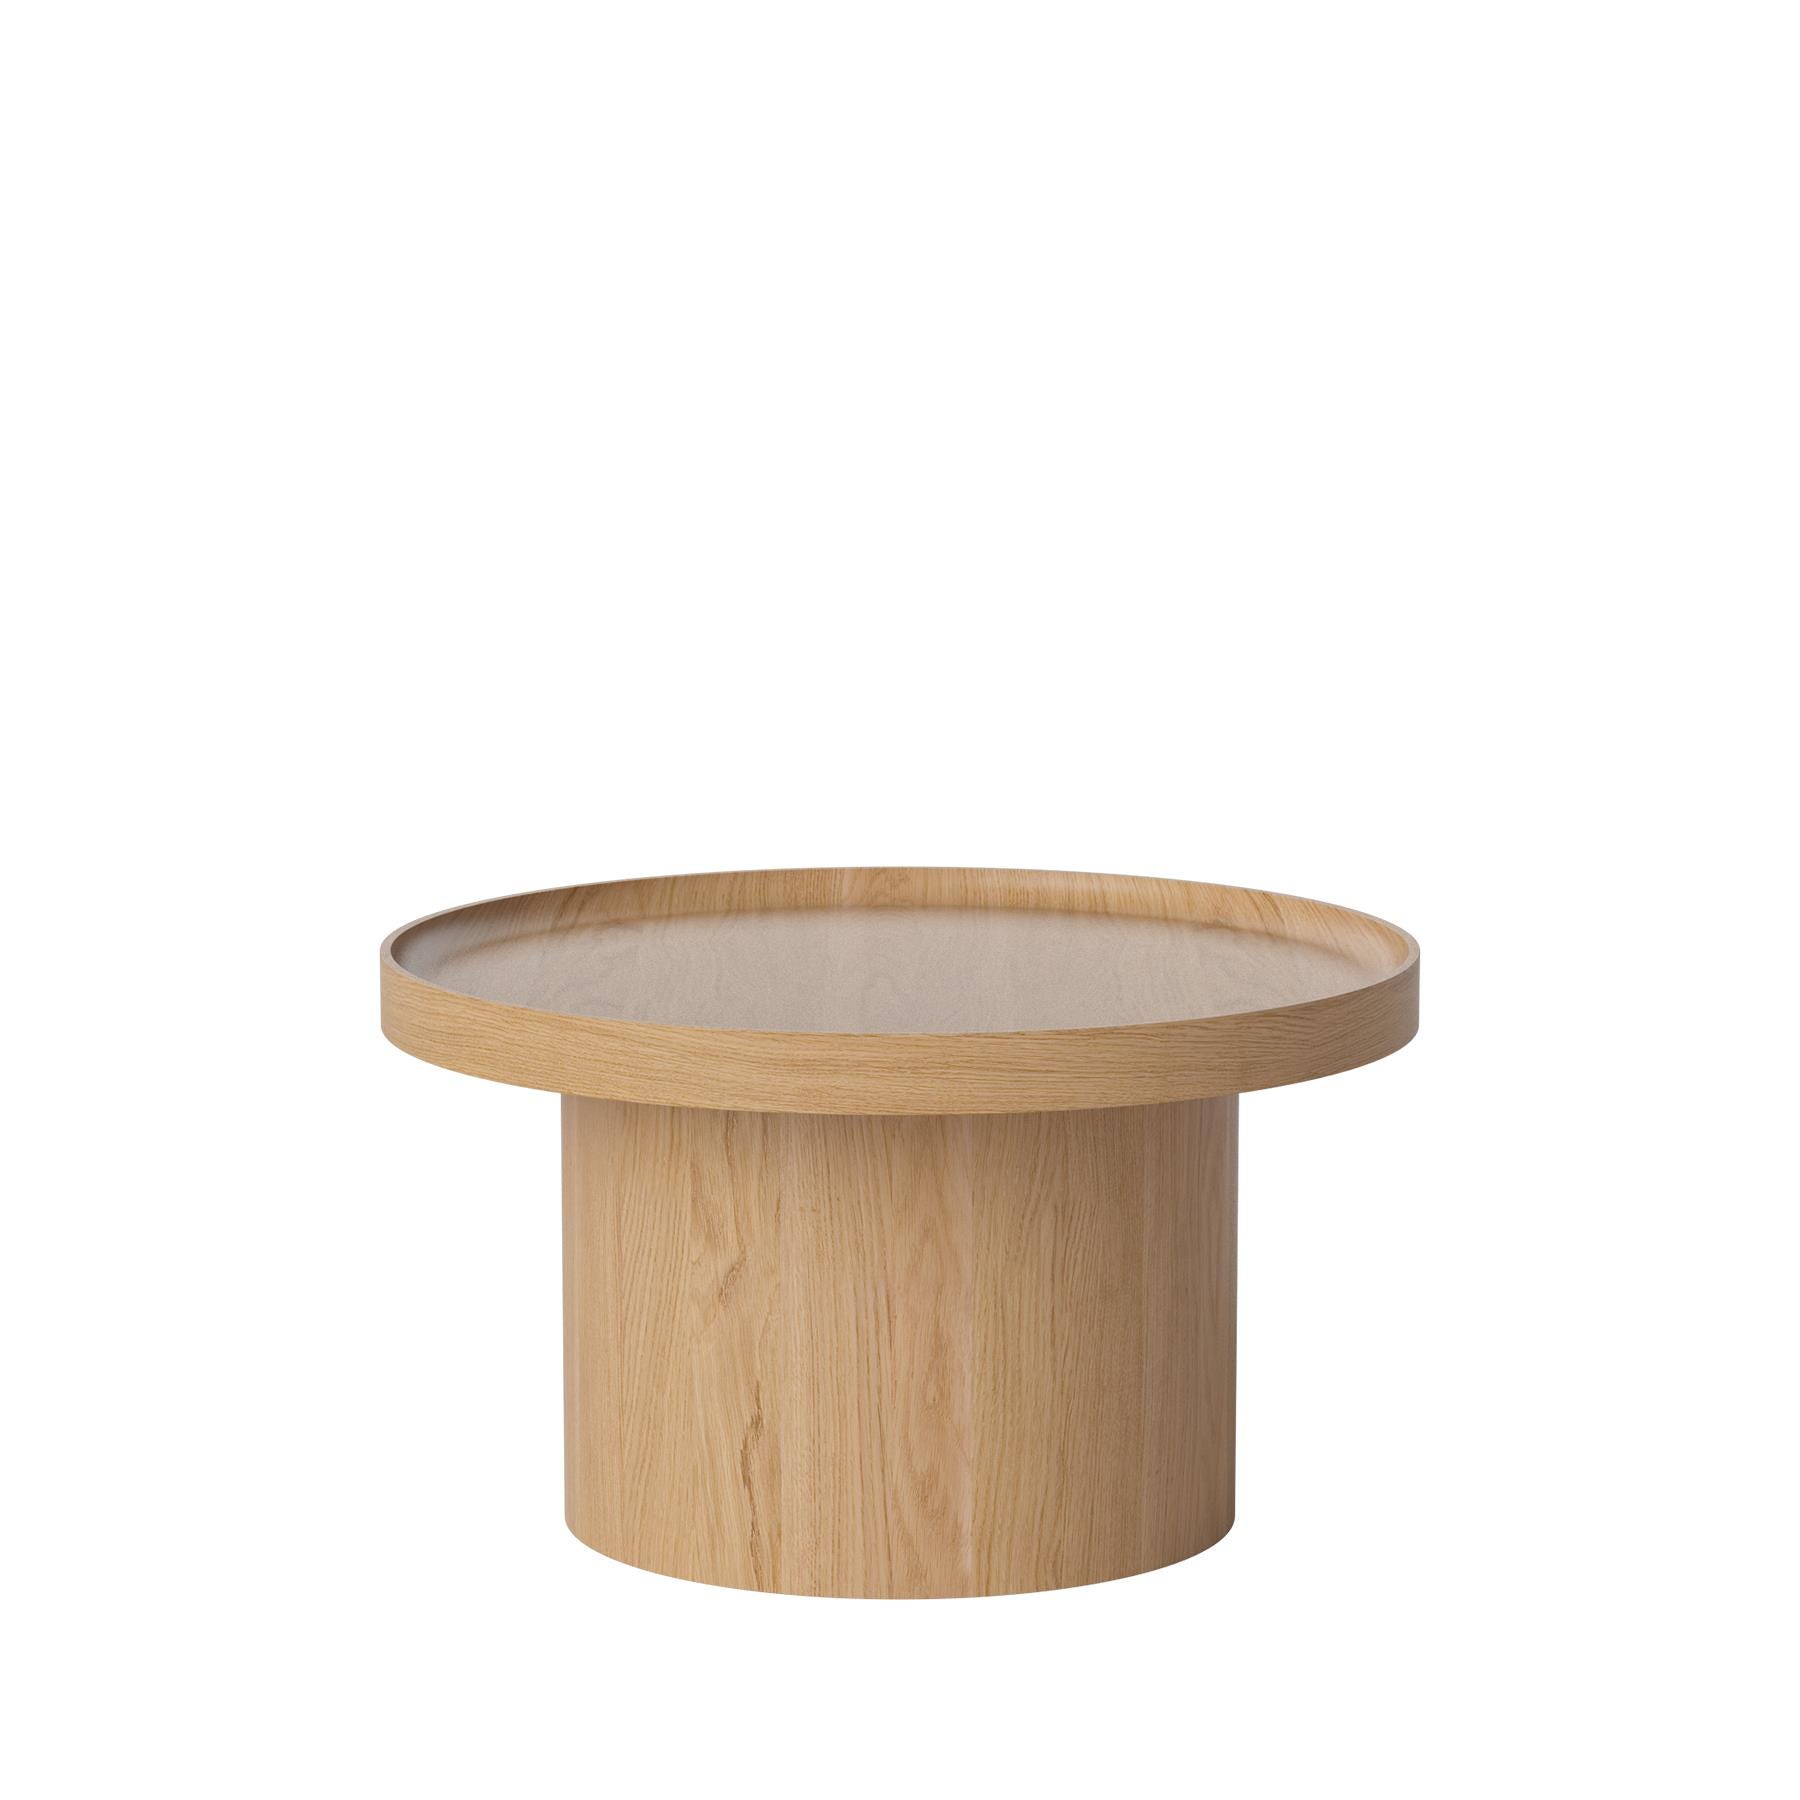 Bolia Plateau Coffee Table Medium Lacquered Oak Light Wood Designer Furniture From Holloways Of Ludlow